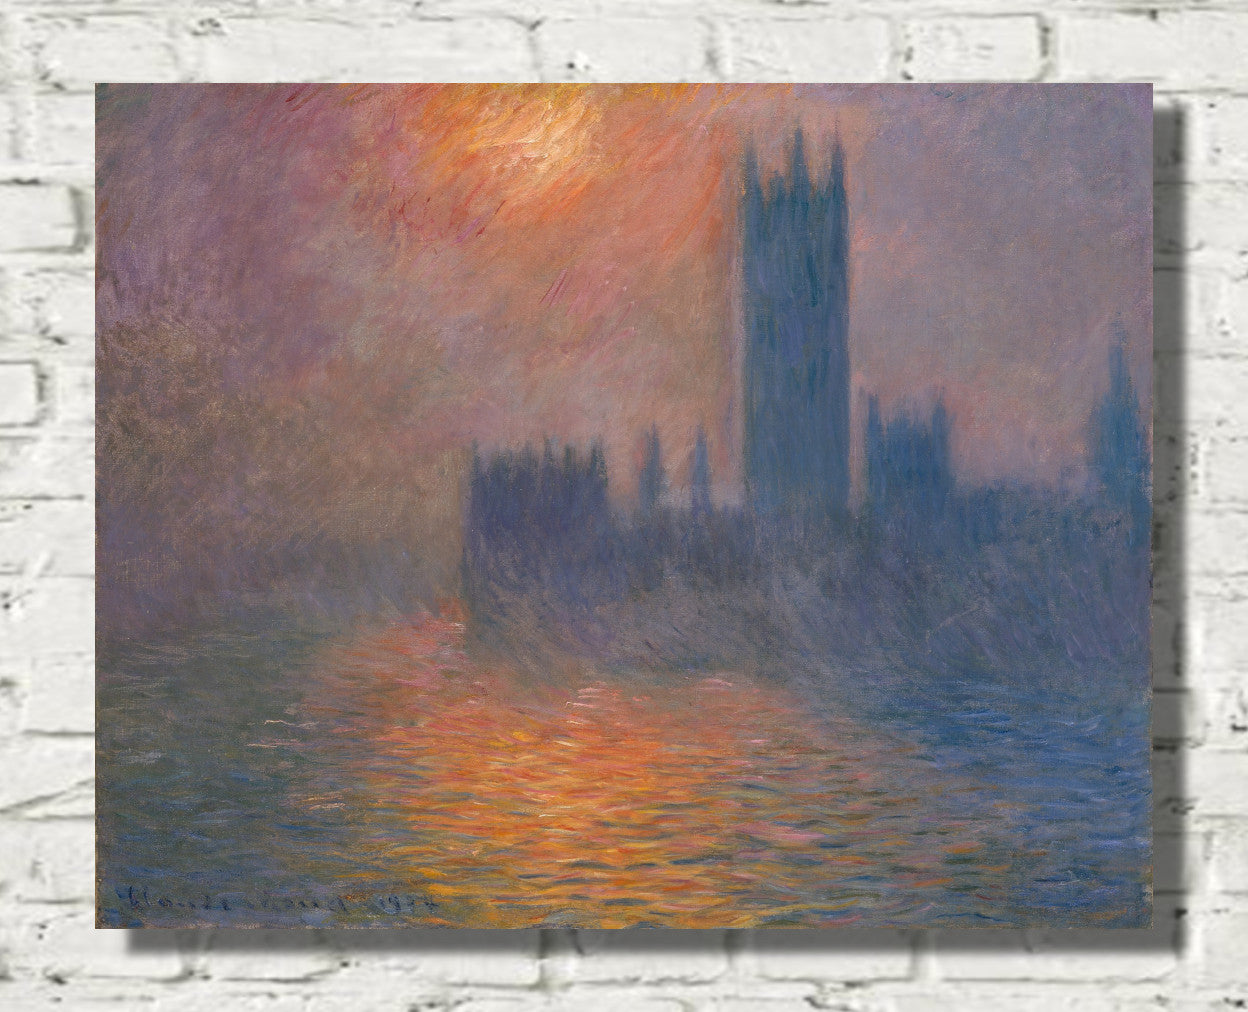 Houses of Parliament at sunset by Claude Monet